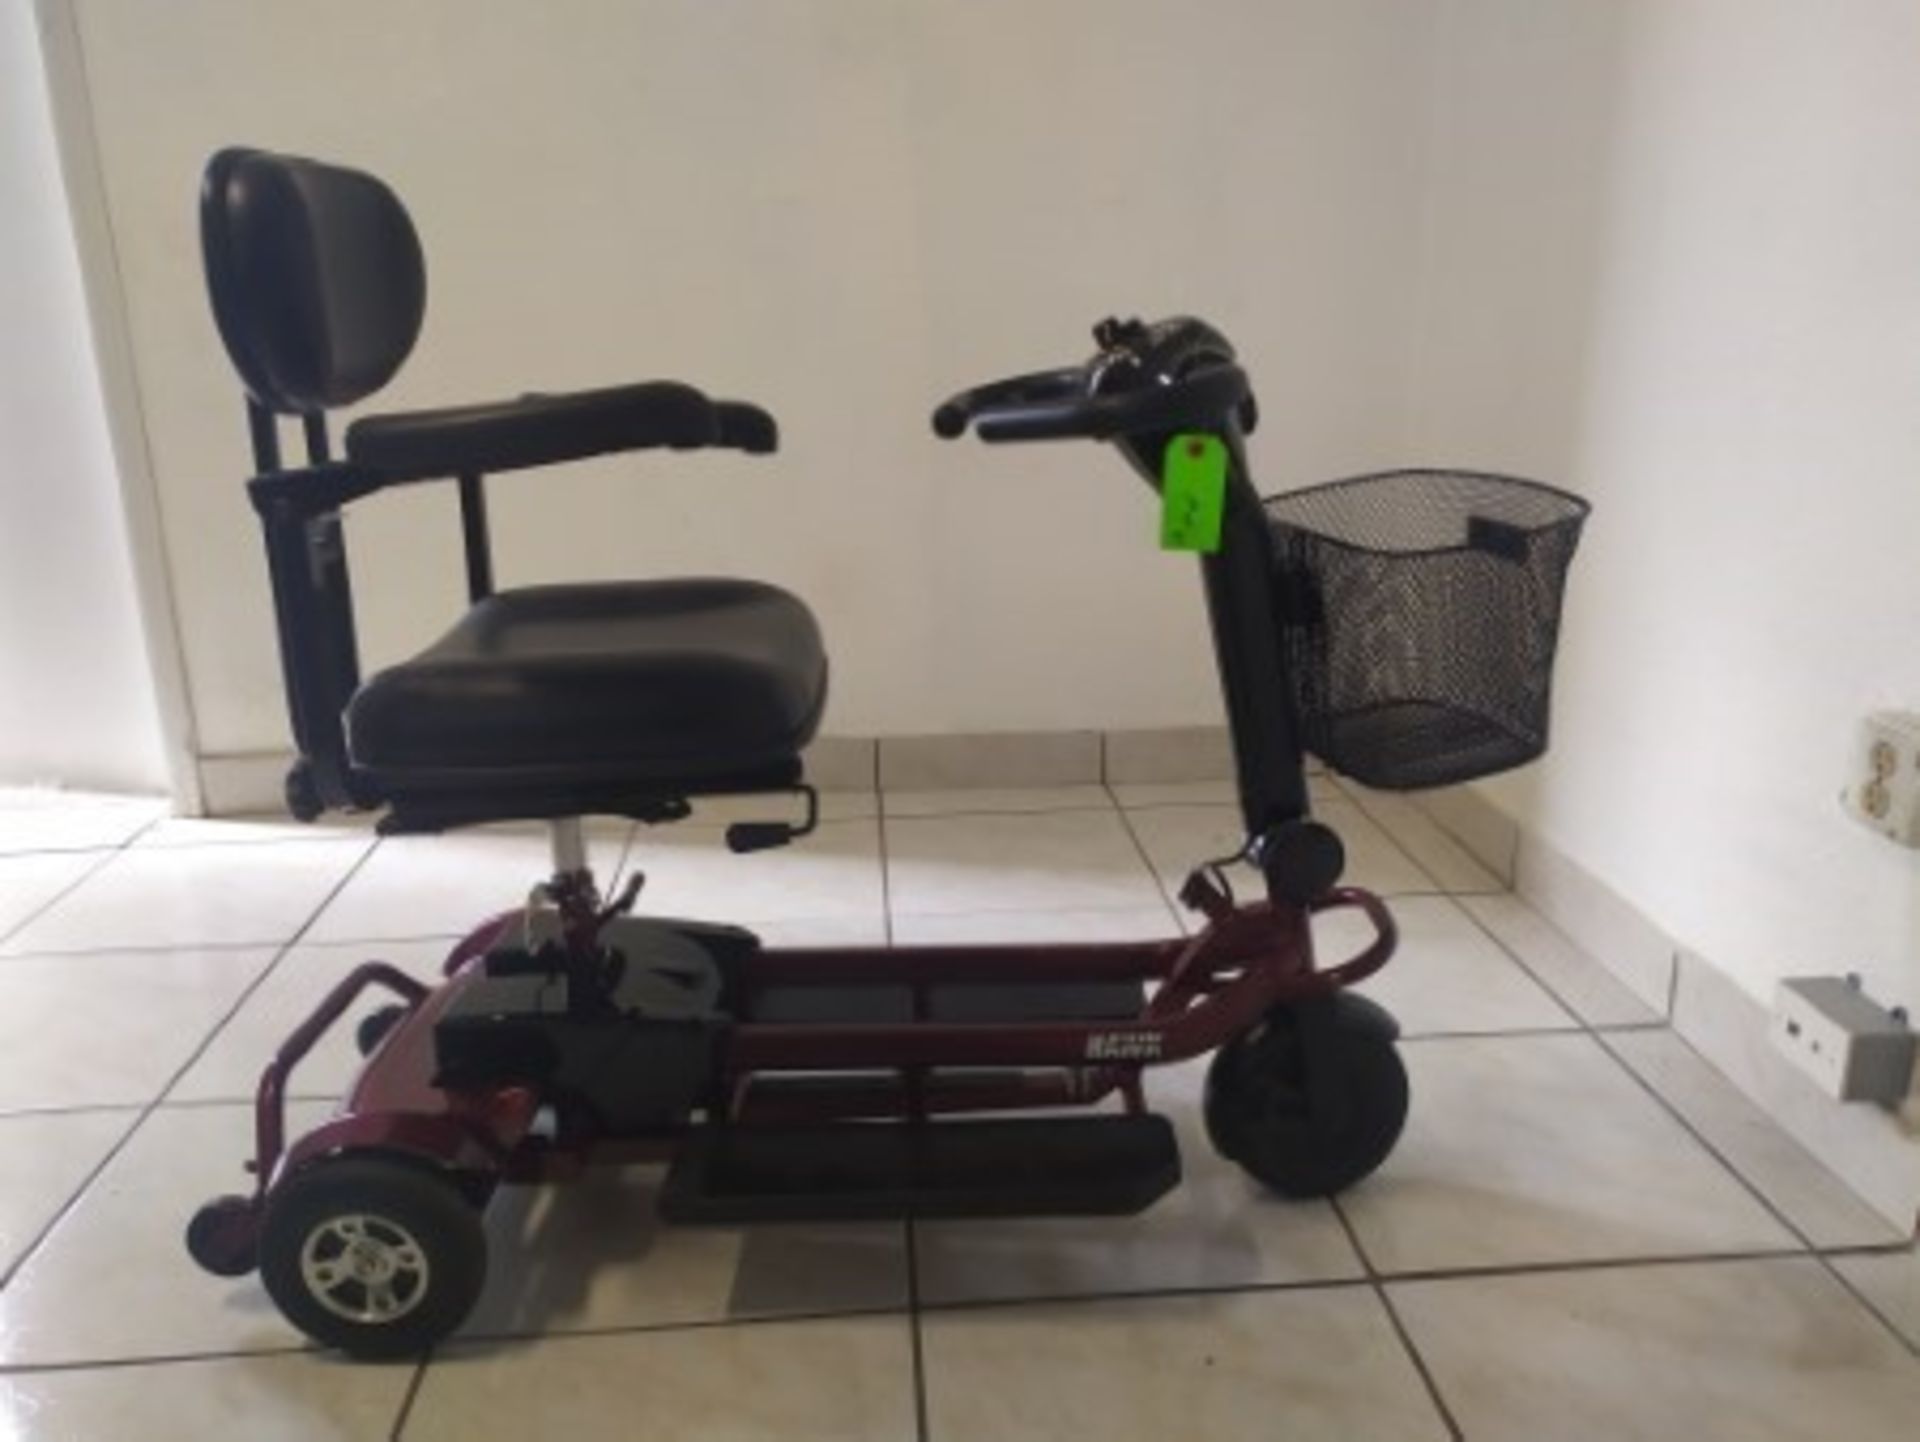 2012 DRIVE HAWK 3-WHEEL SCOOTER WITH BASKET - RED - 250LB CAPACITY - SERIAL No. 2A06090258PQ (NO CHA - Image 6 of 6